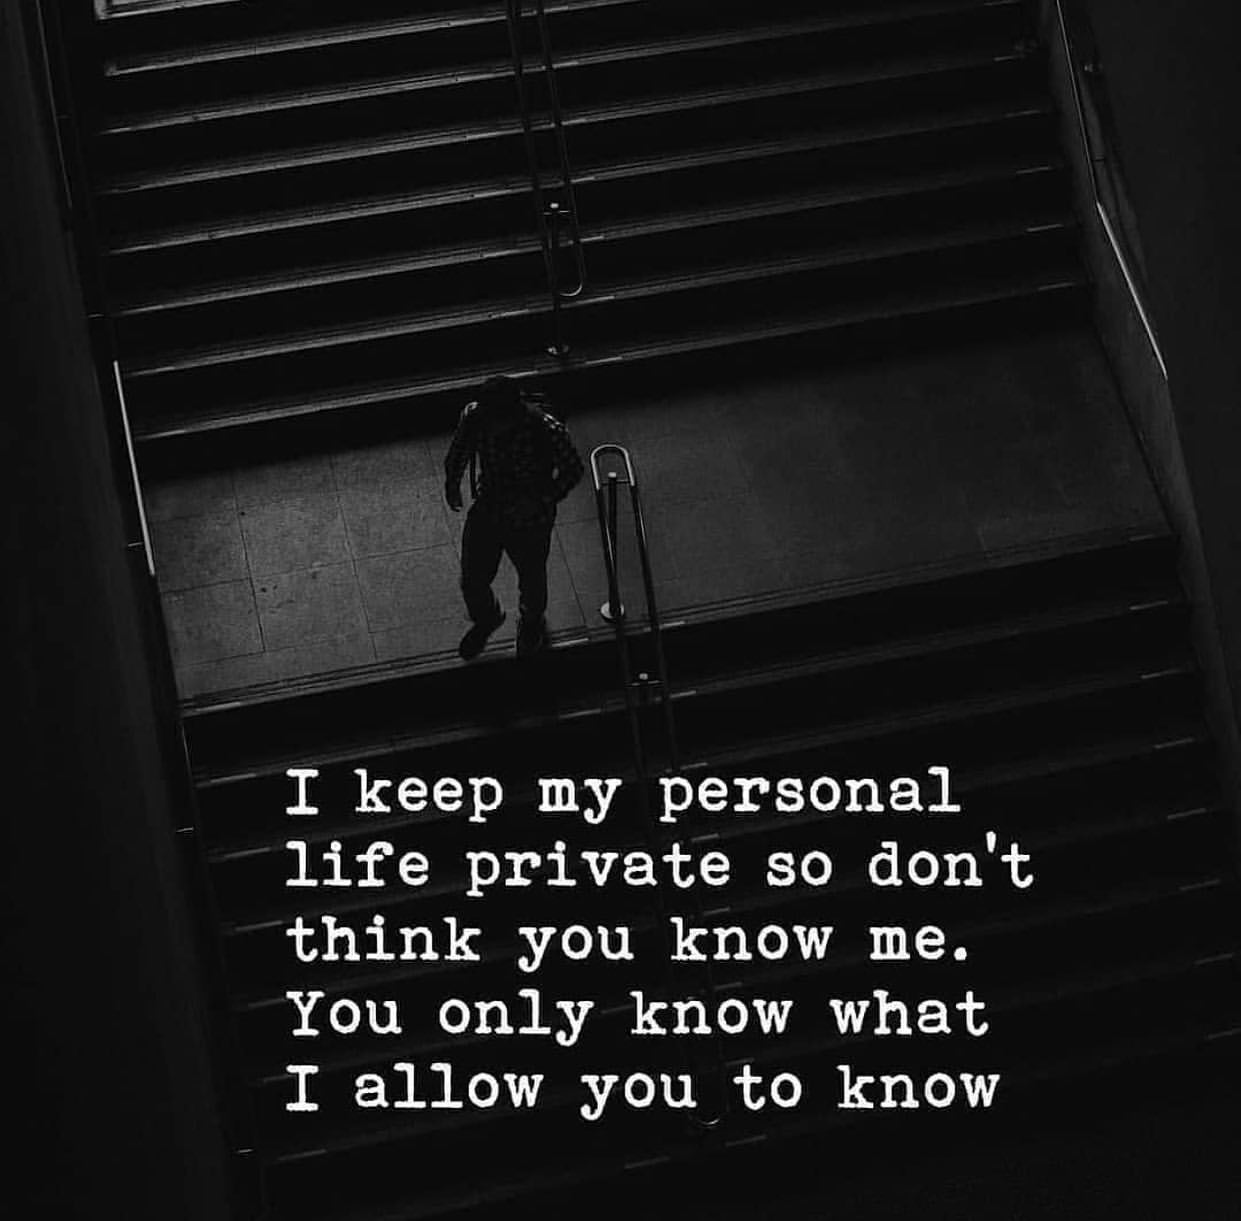 I keep my personal life private so don't think you know me. You only know what I allow you to know.